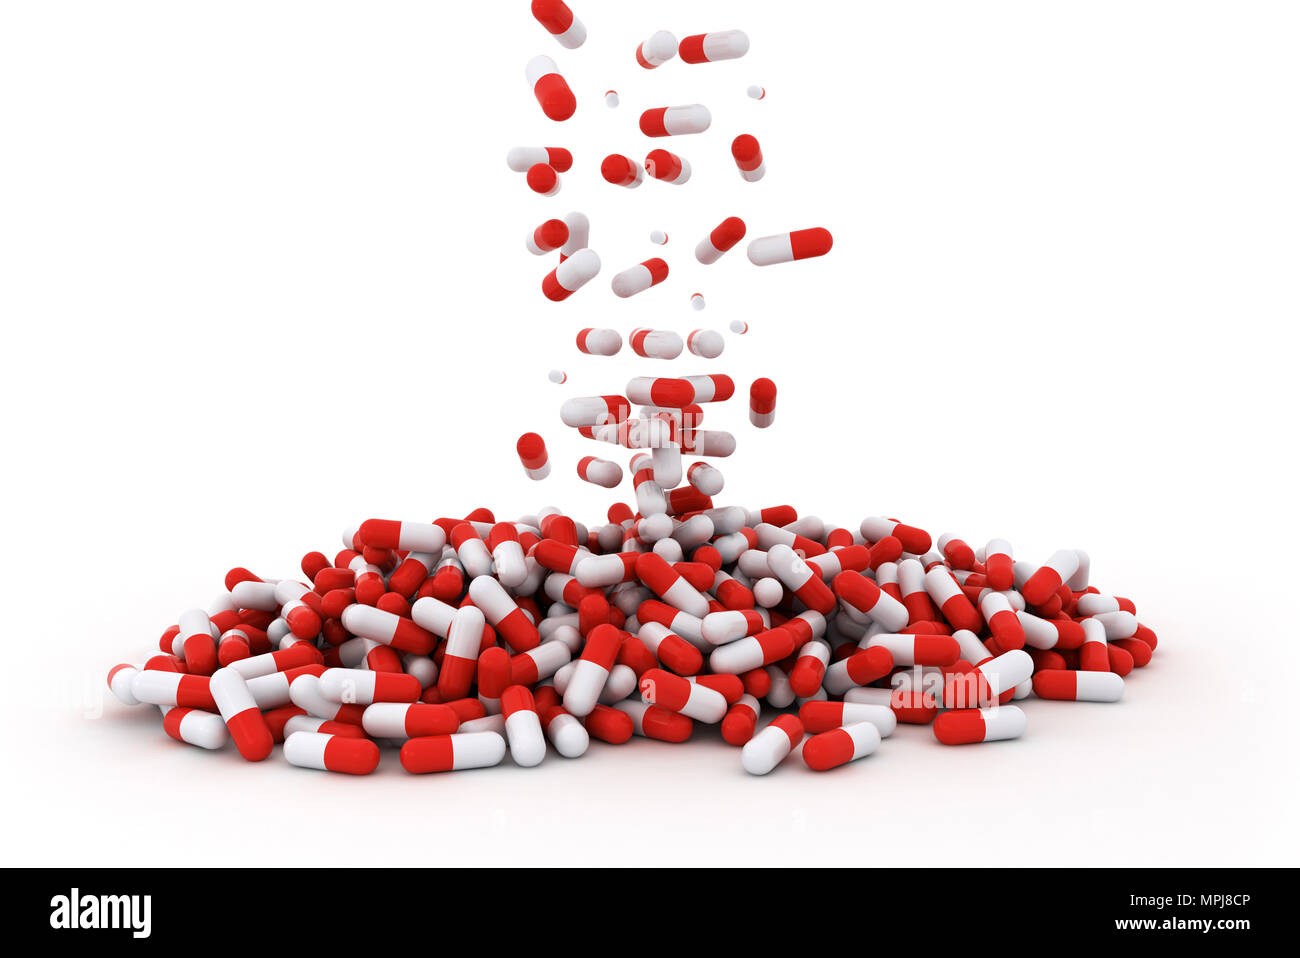 Drug prescription for treatment medication. Pharmaceutical medicament. Pharmacy theme, Heap of red and white round capsule pills. Isolated on white ba Stock Photo